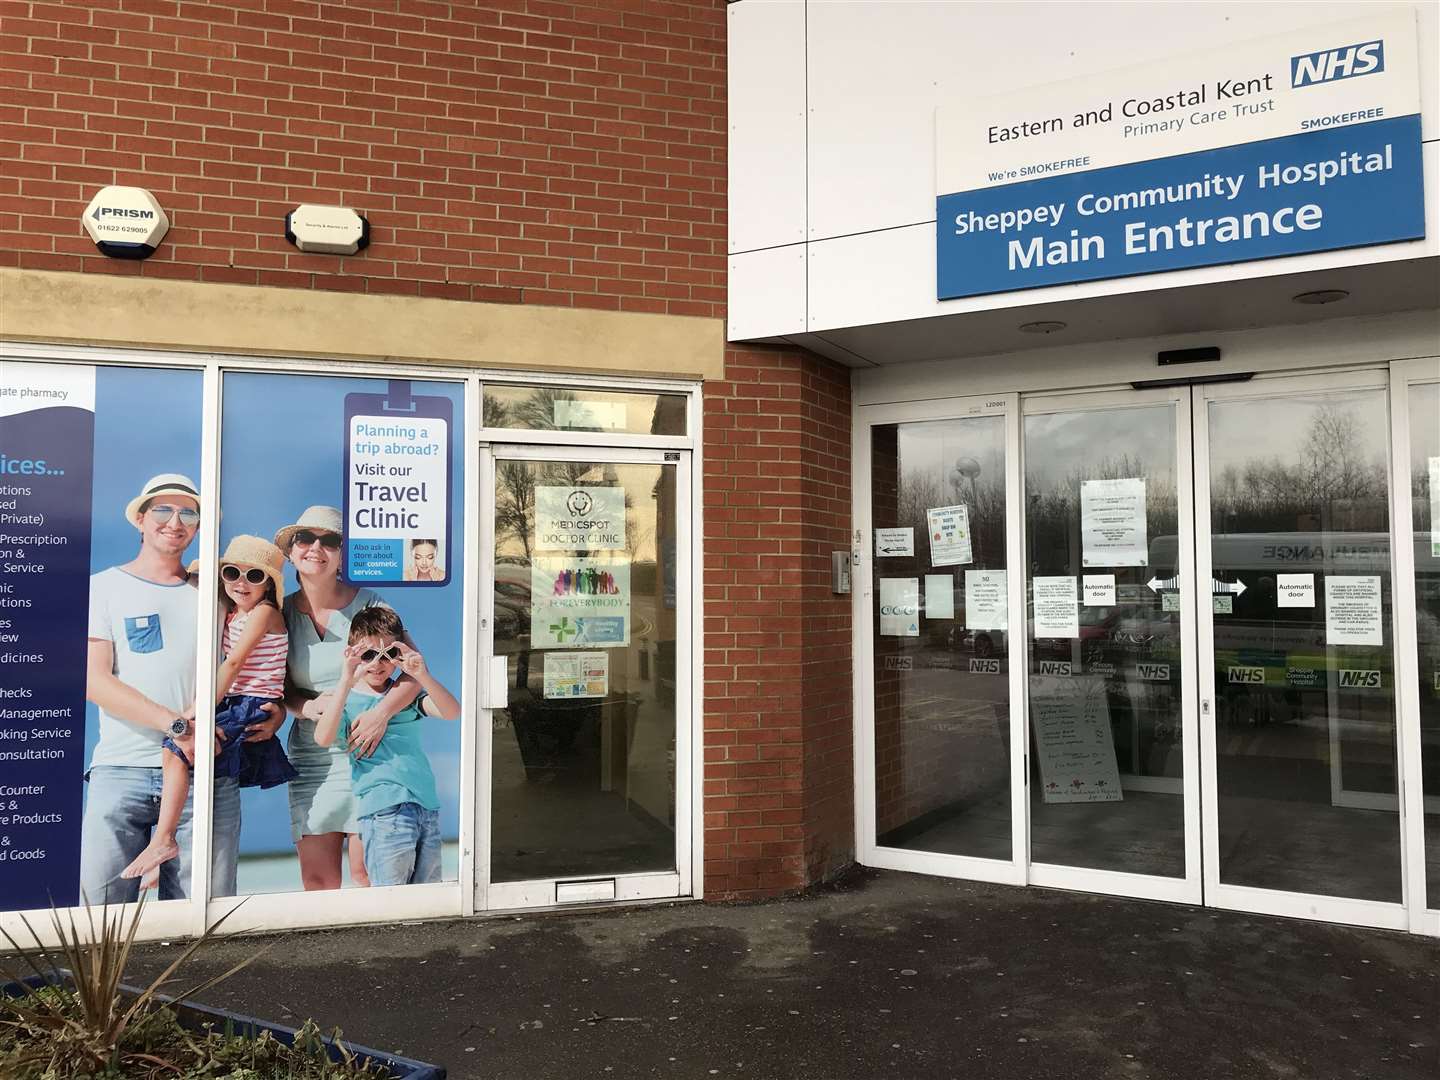 The DMC surgery at Sheppey Community Hospital will close at the end of October